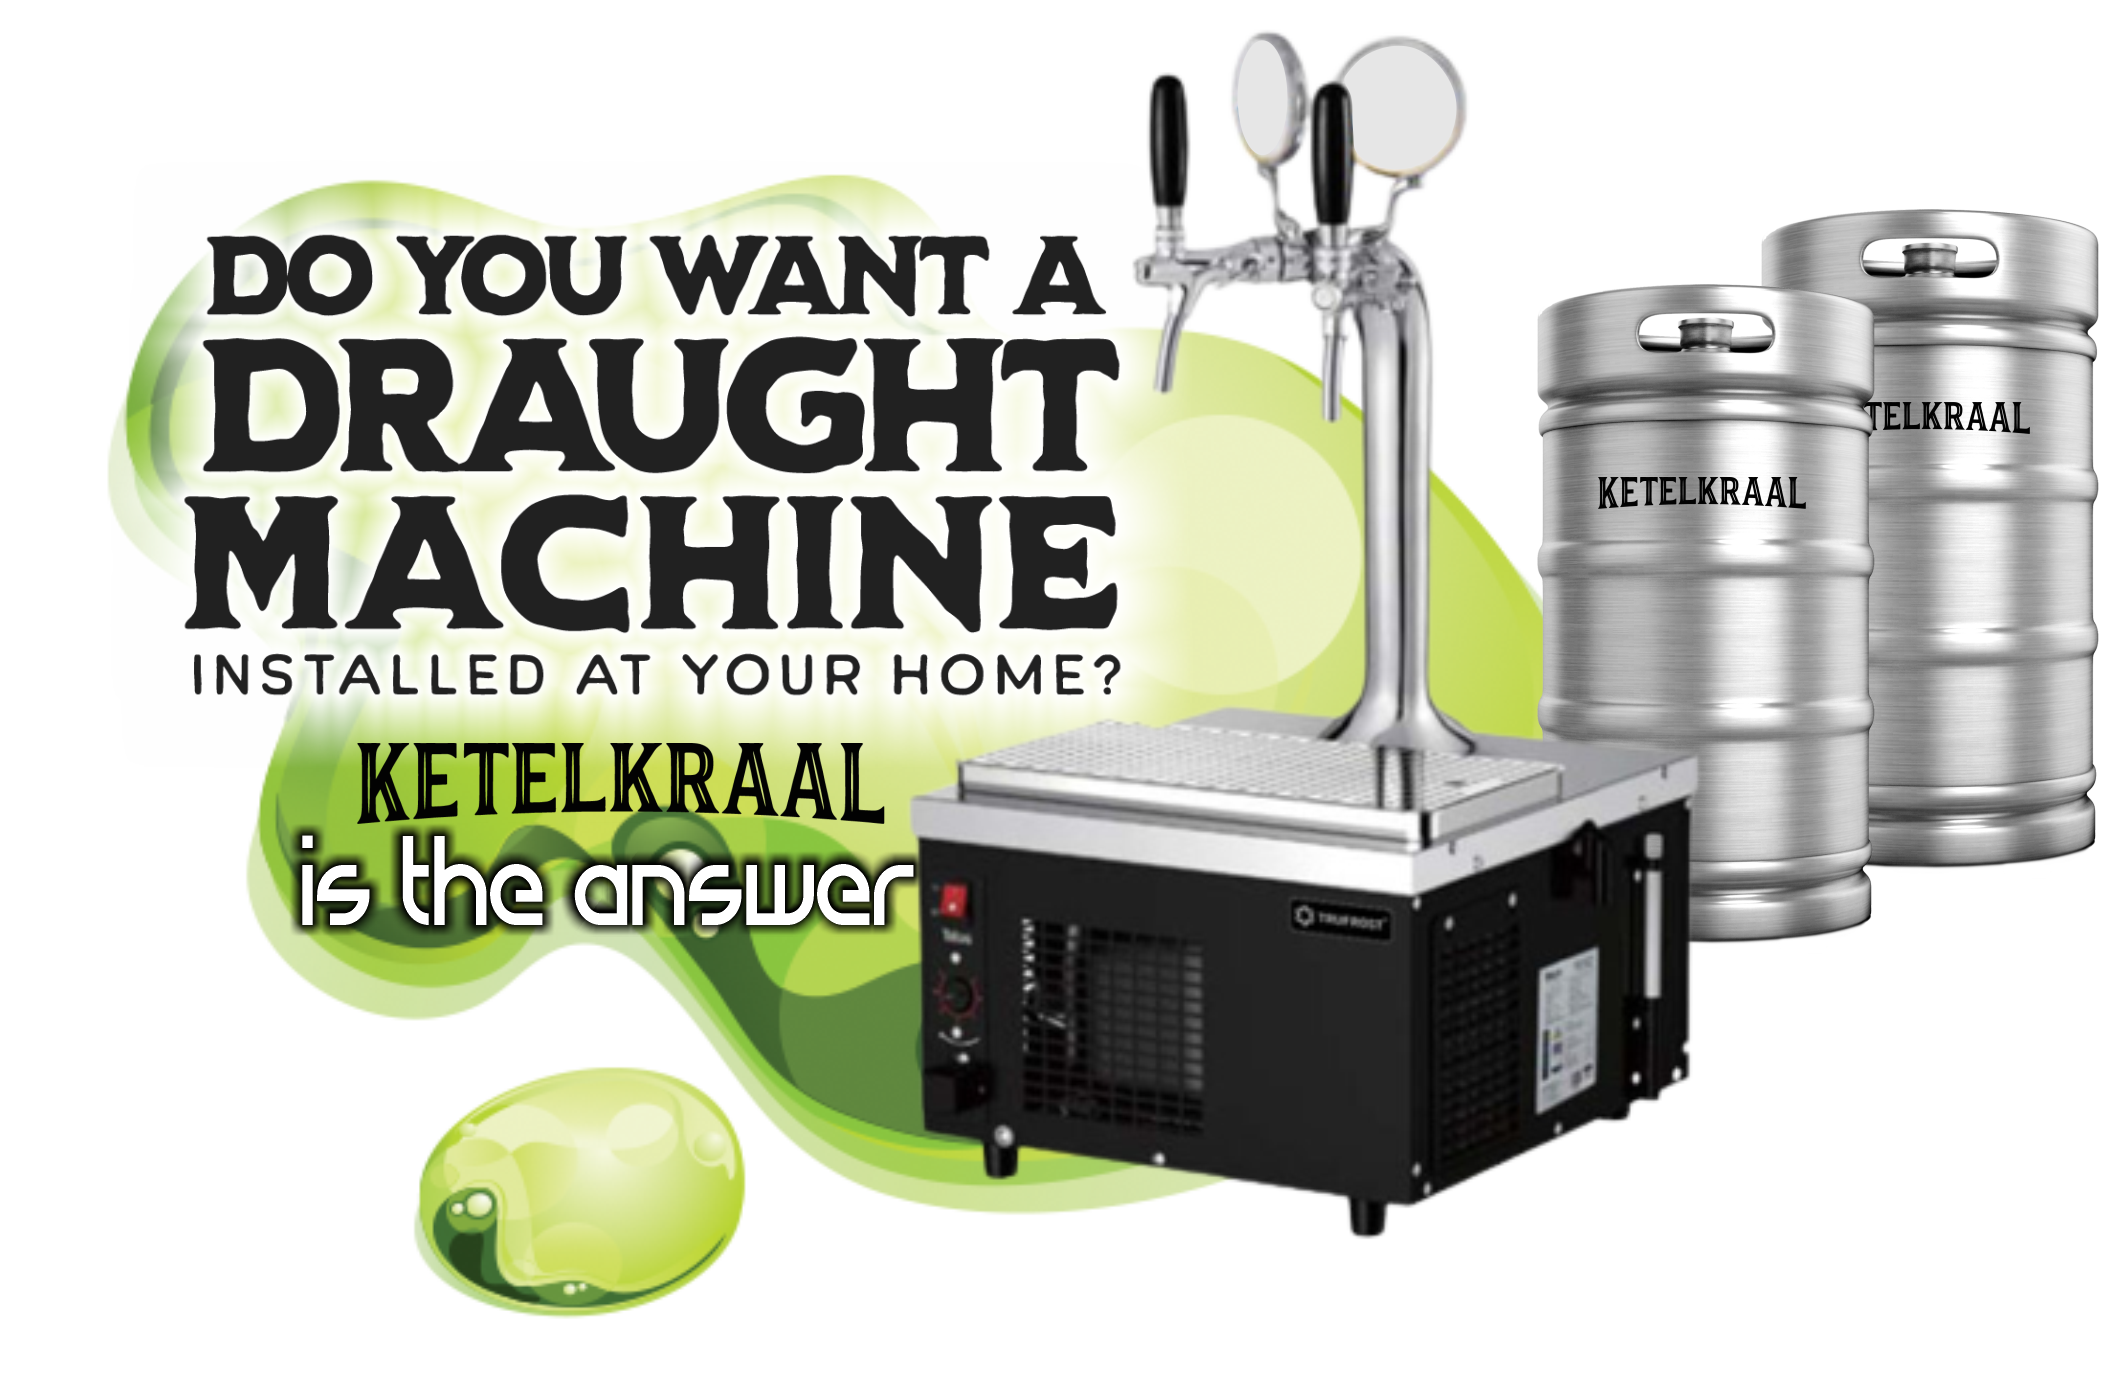 WANT A DRAUGHT MACHINE INSTALLED @ HOME?